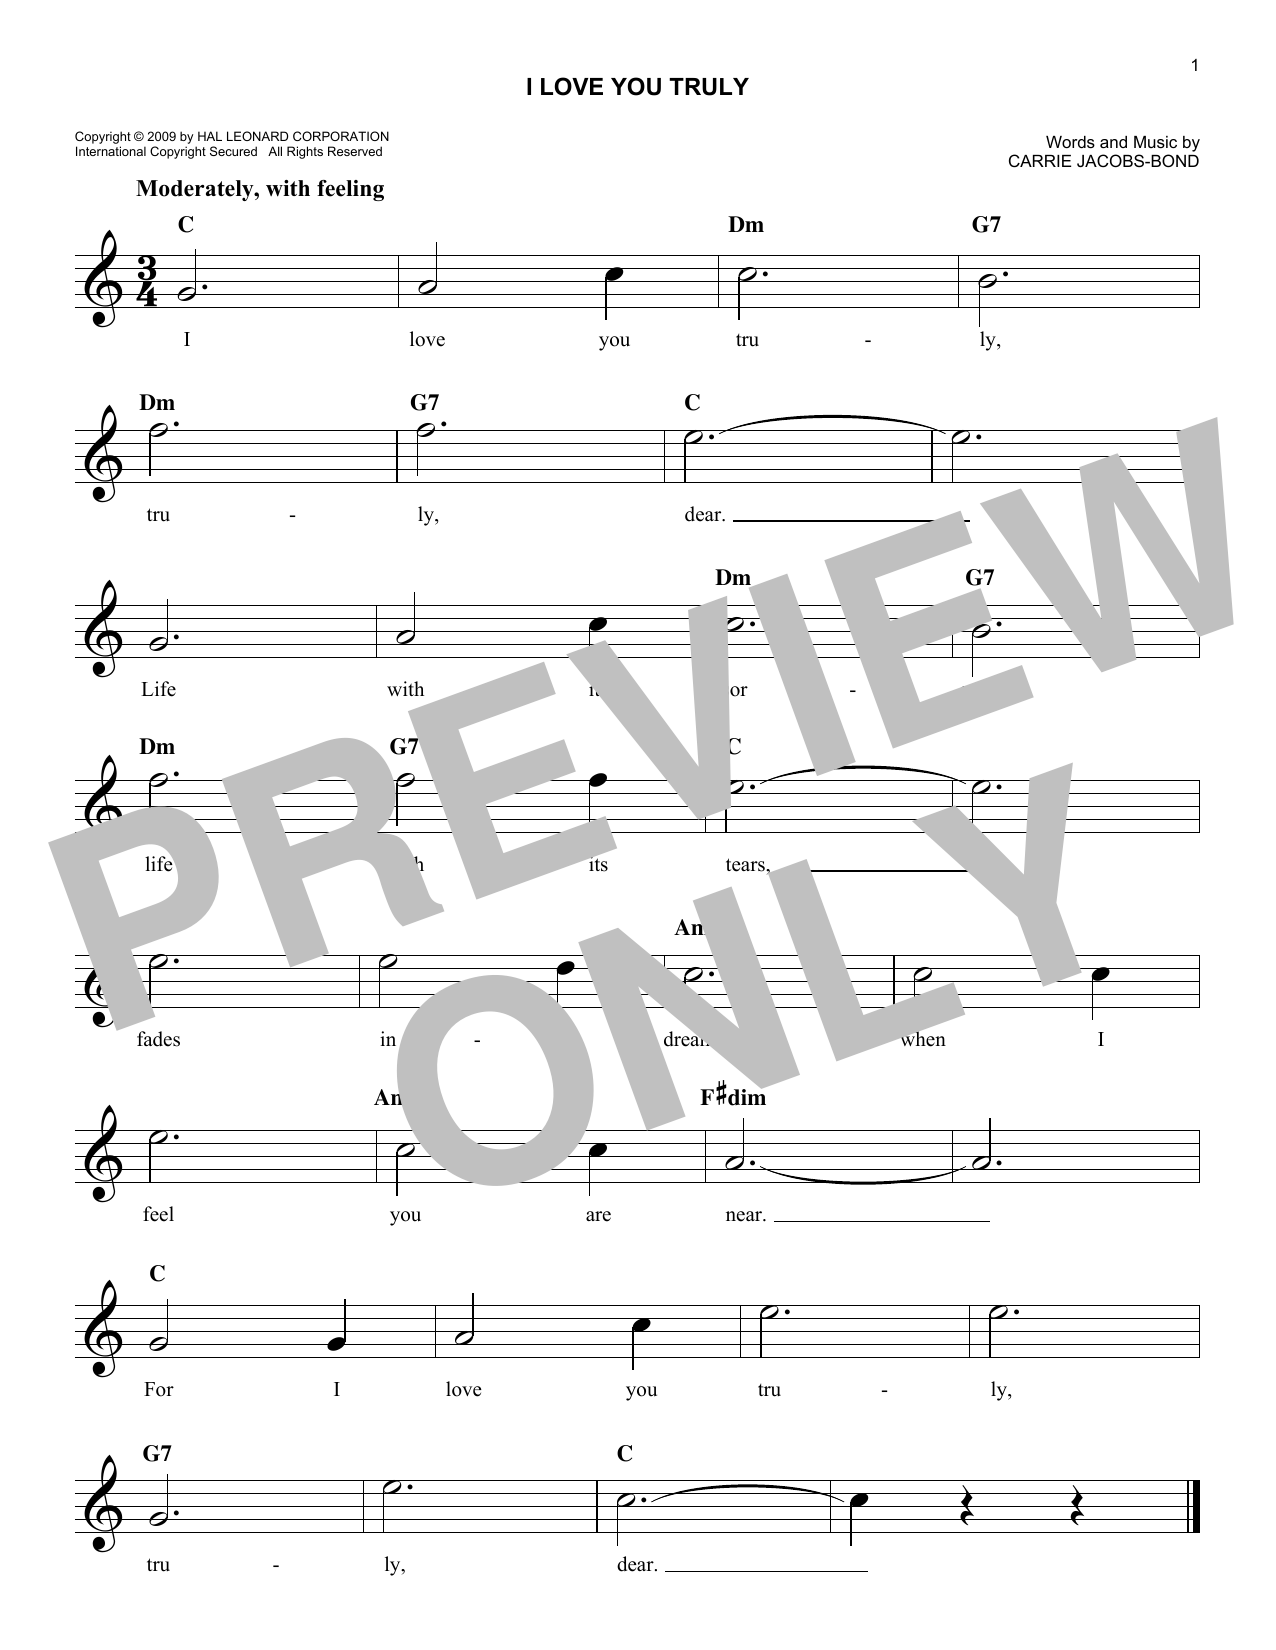 Carrie Jacobs-Bond I Love You Truly sheet music notes and chords. Download Printable PDF.